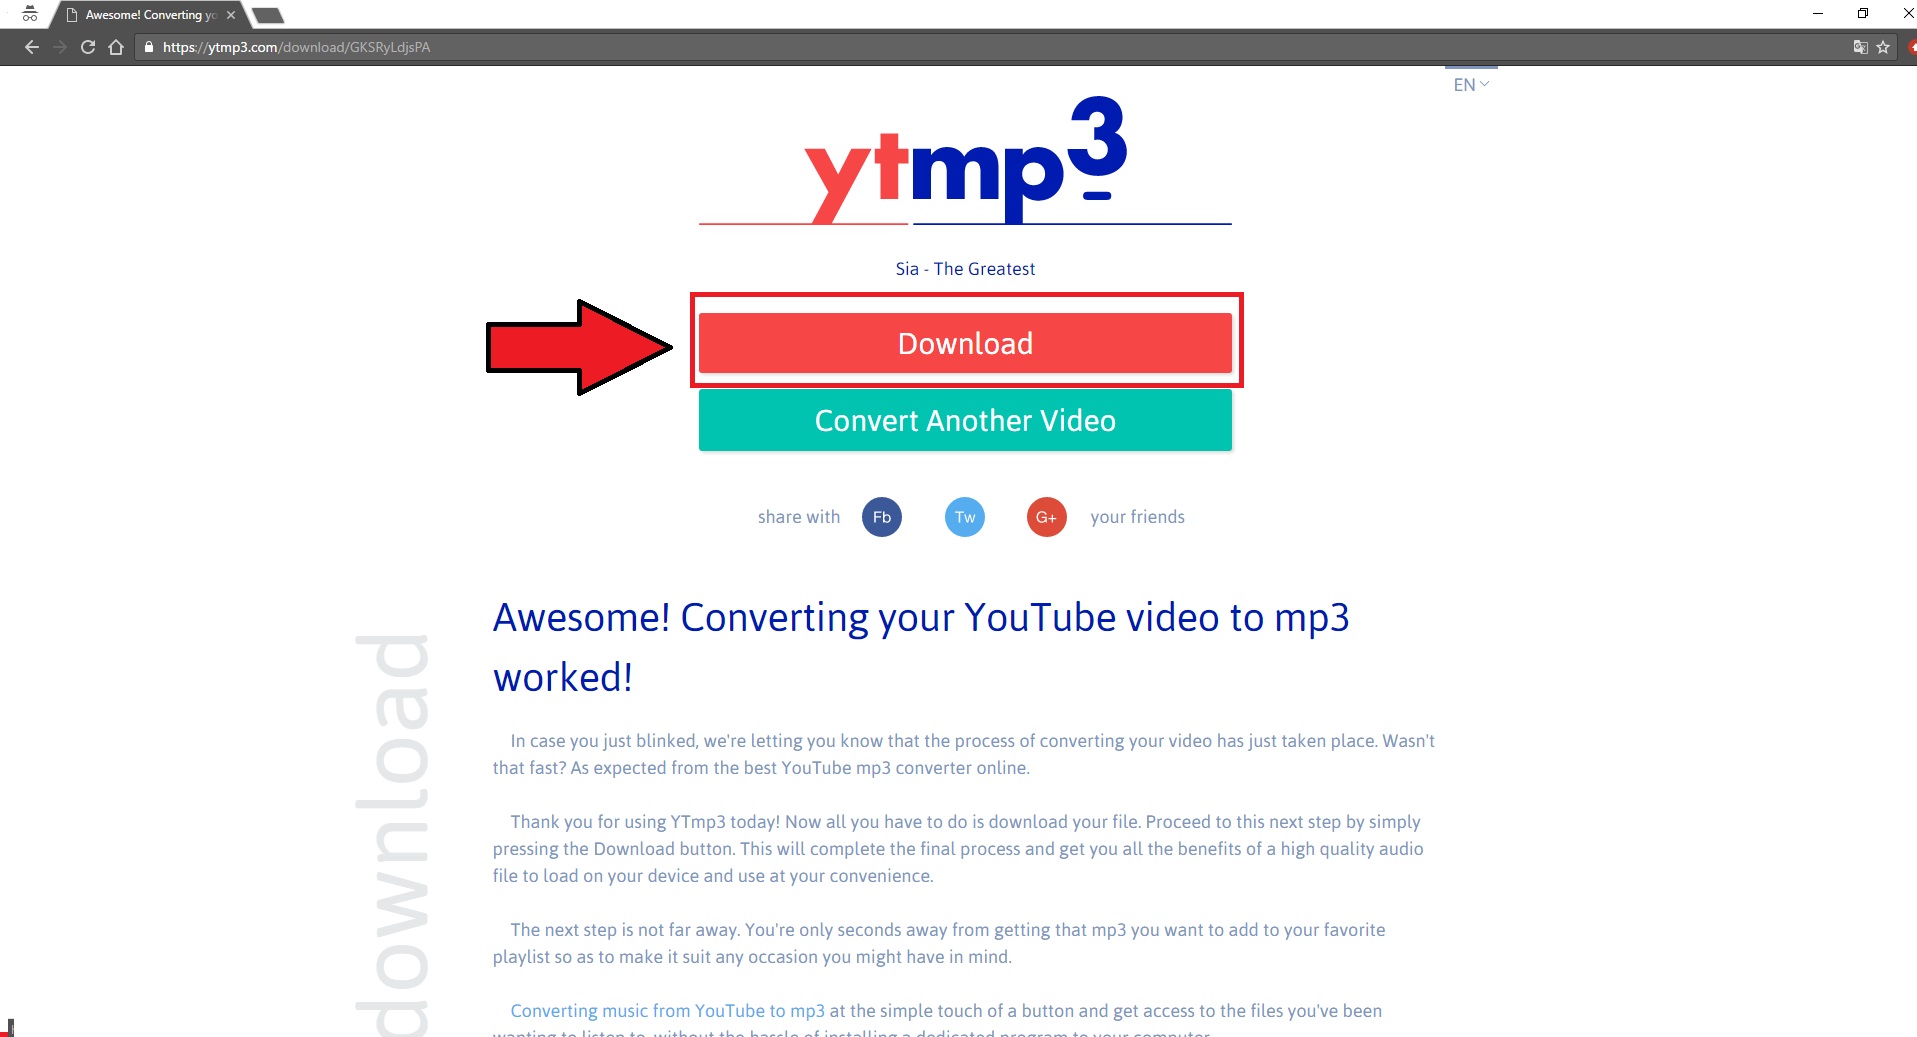 Free Download/Convert YouTube Music to MP3 | Hivimoore